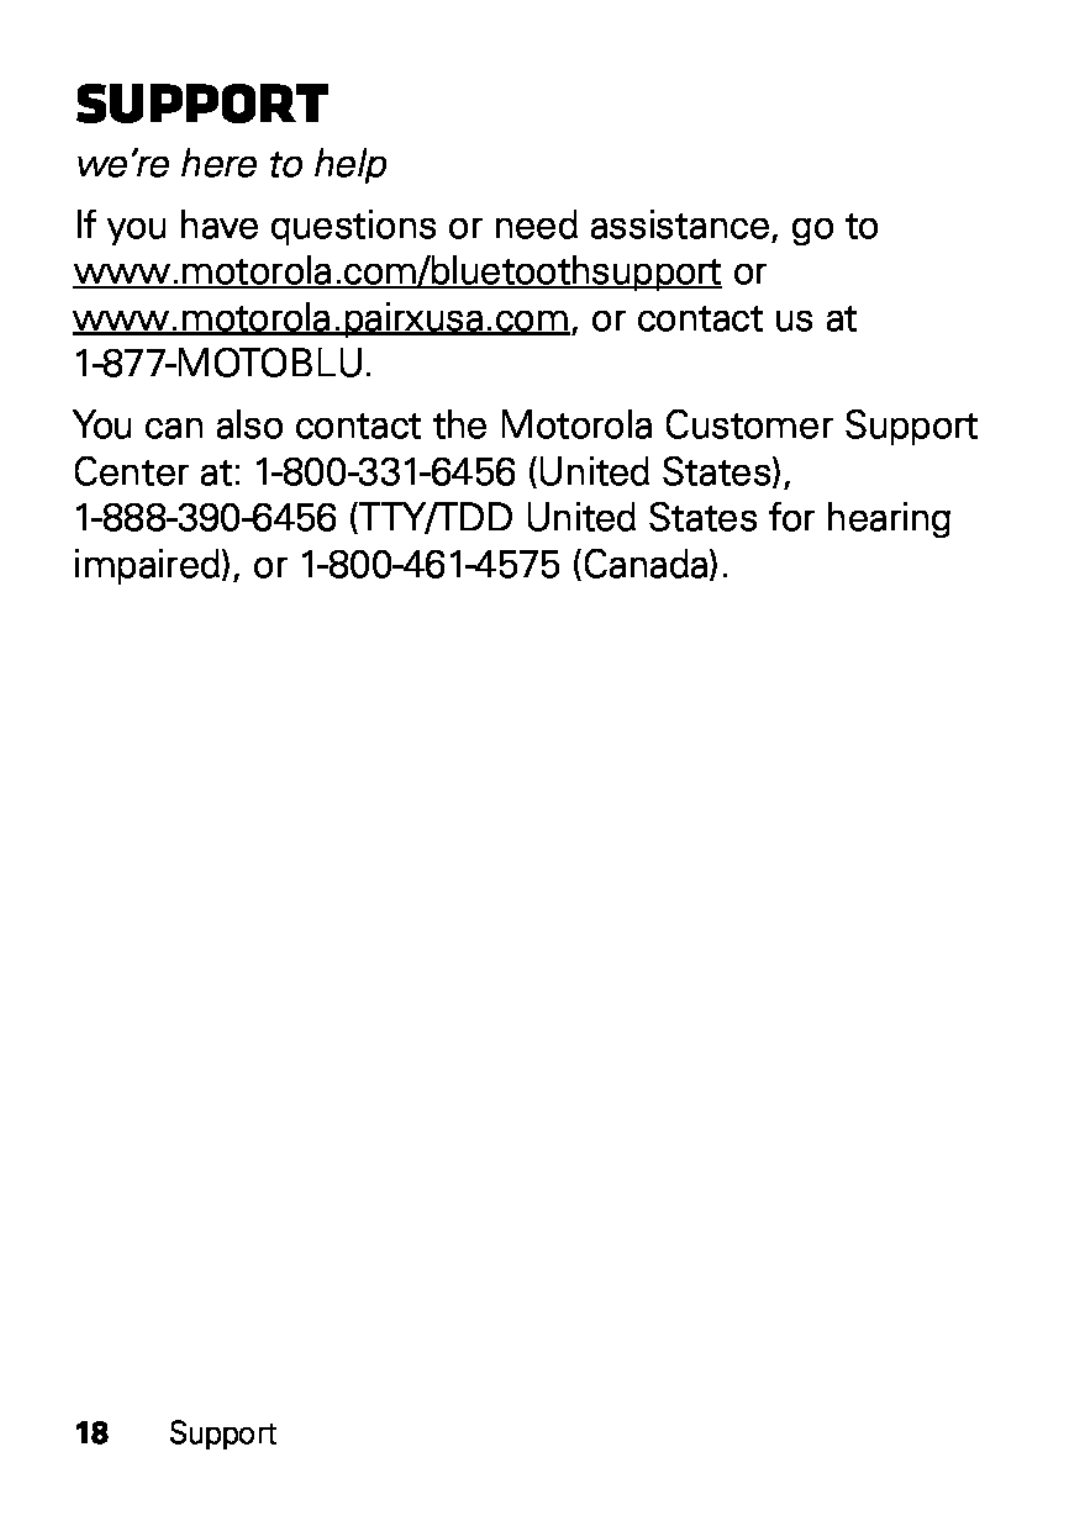 Motorola HX550 manual Support, we’re here to help 